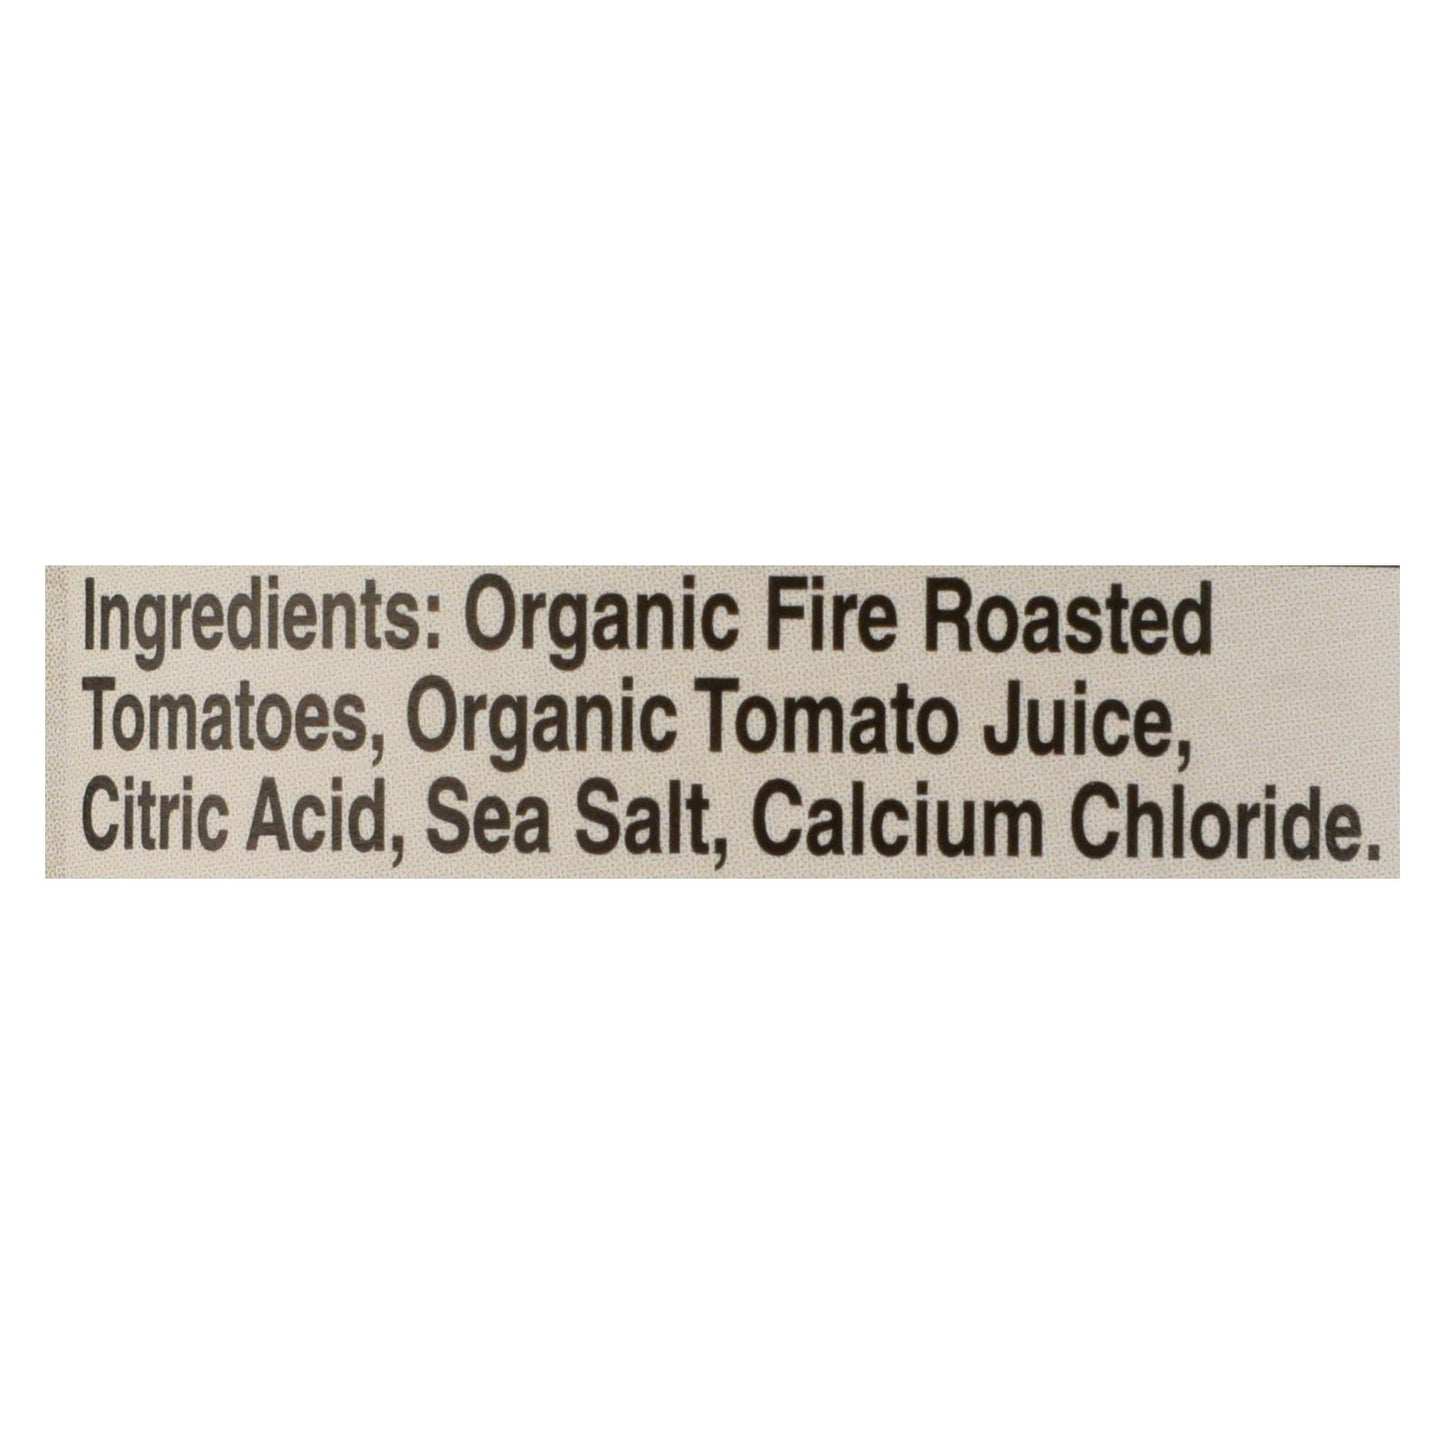 Muir Glen Fire Roasted Diced Tomatoes - Tomato - Case Of 12 - 14.5 Oz.